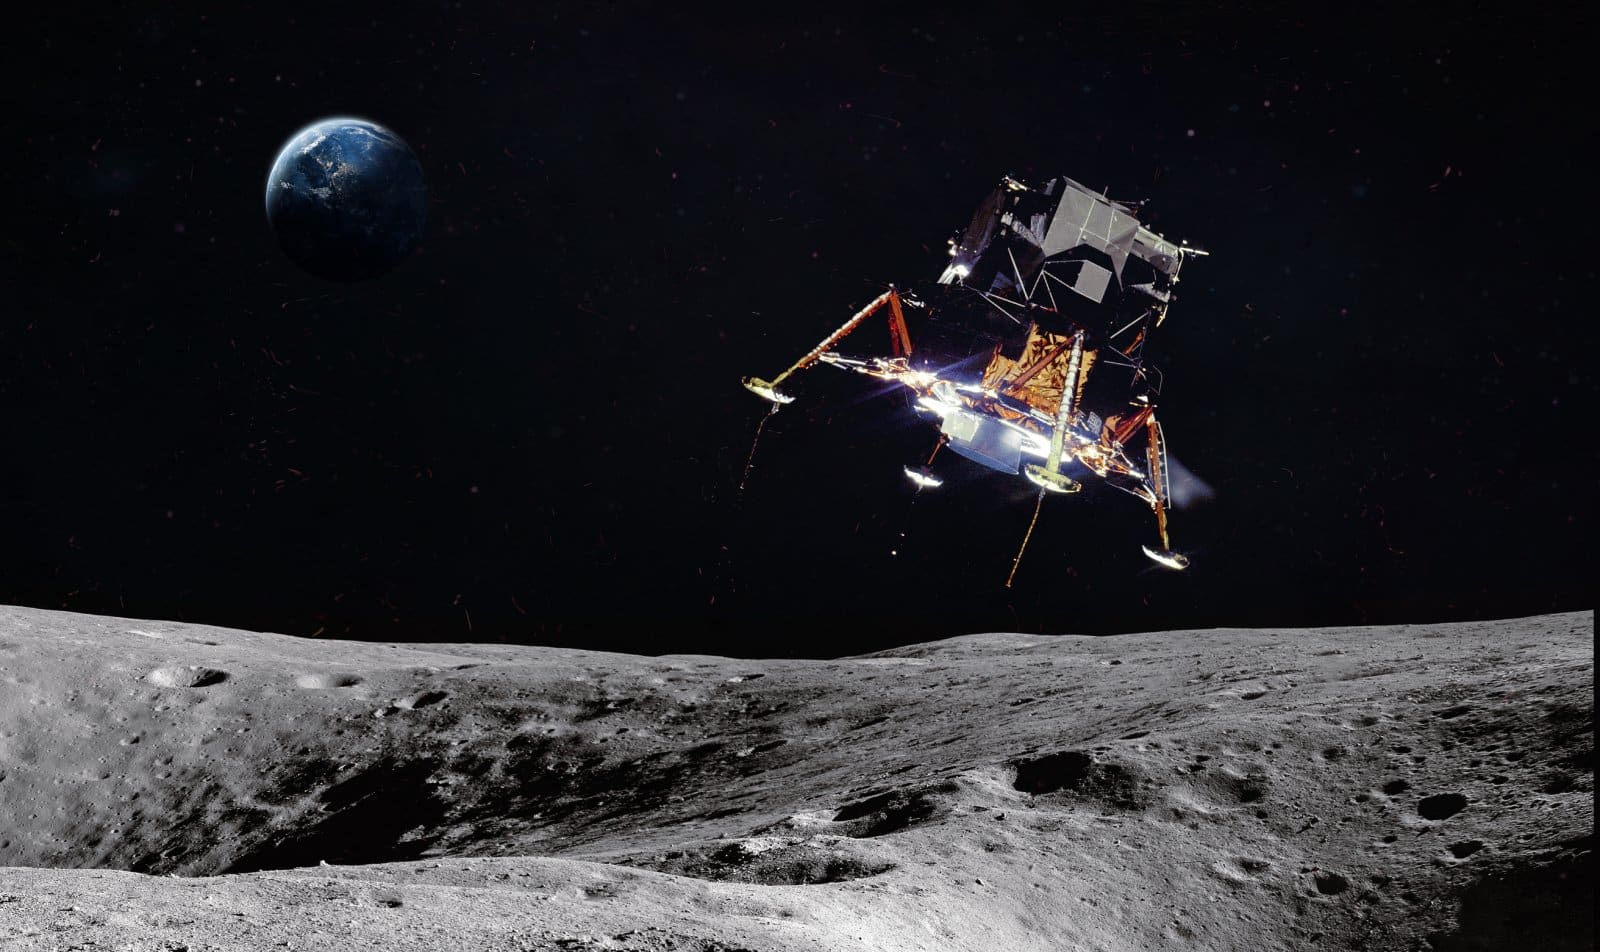 <p class="wp-caption-text">Image Credit: Shutterstock / Dima Zel</p>  <p><span>Lunar flybys mark an ambitious step in space tourism, offering private citizens the chance to journey around the Moon. This mission, reminiscent of the Apollo missions of the 1960s and 70s, promises an unparalleled adventure, bringing you up close to the lunar surface before witnessing the Earth rising over the Moon’s horizon.</span></p> <p><span>SpaceX’s Starship is one of the spacecraft intended to make such missions possible, providing a comfortable and safe journey for those aboard. The experience of seeing the Moon up close and the Earth in full view offers an extraordinary sense of our place in the universe and the interconnectedness of all life on our planet.</span></p> <p><b>Insider’s Tip:</b><span> Such a mission requires physical preparation and a deep commitment, as it represents one of the longer-duration space tourism experiences currently planned.</span></p>